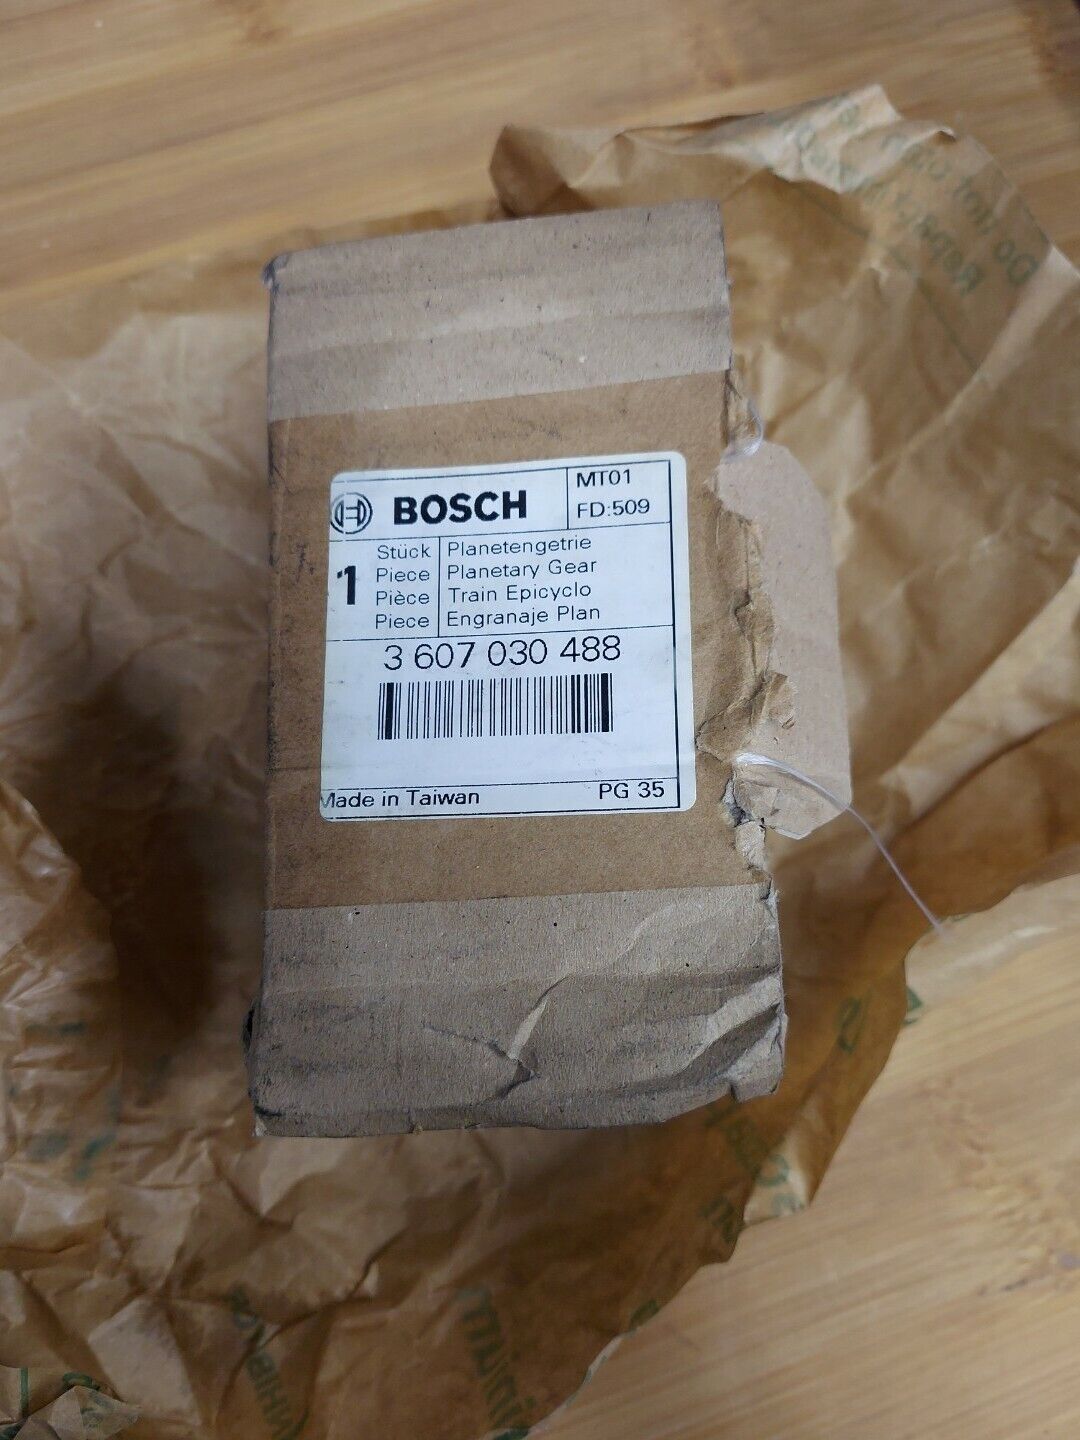 Bosch 3607030488 New Planetary Gear for Cordless Tools (BL122)